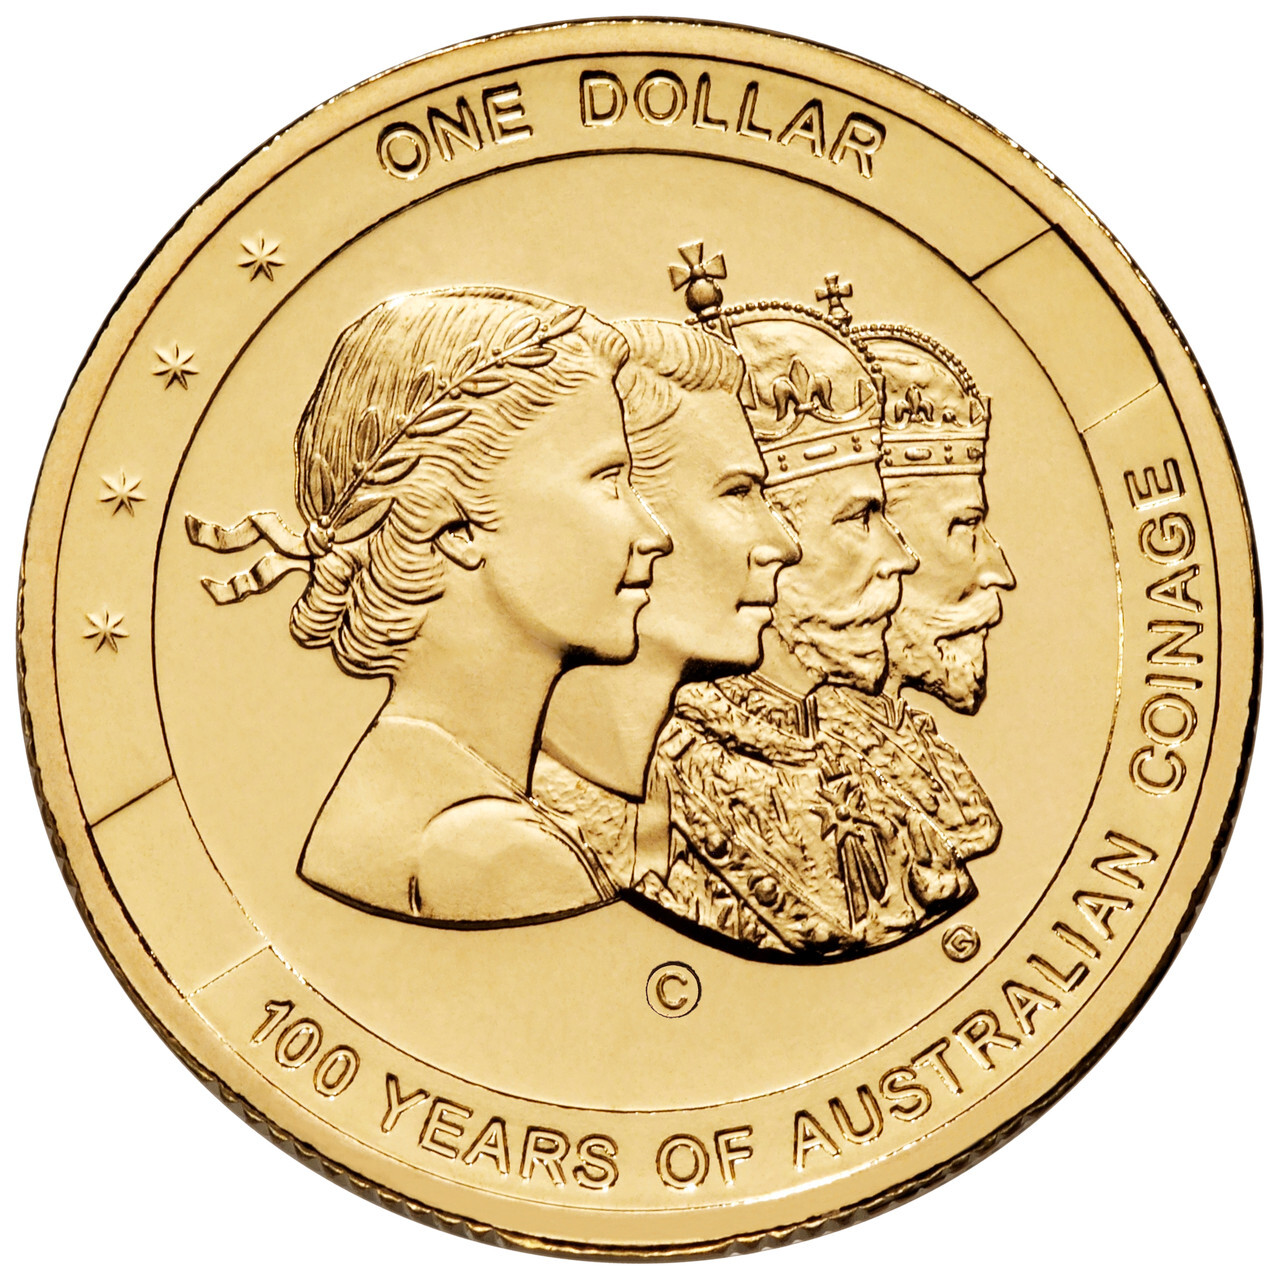 2010 $1 ANDA Canberra 100 Years of Australian Coinage 'C' Counterstamp